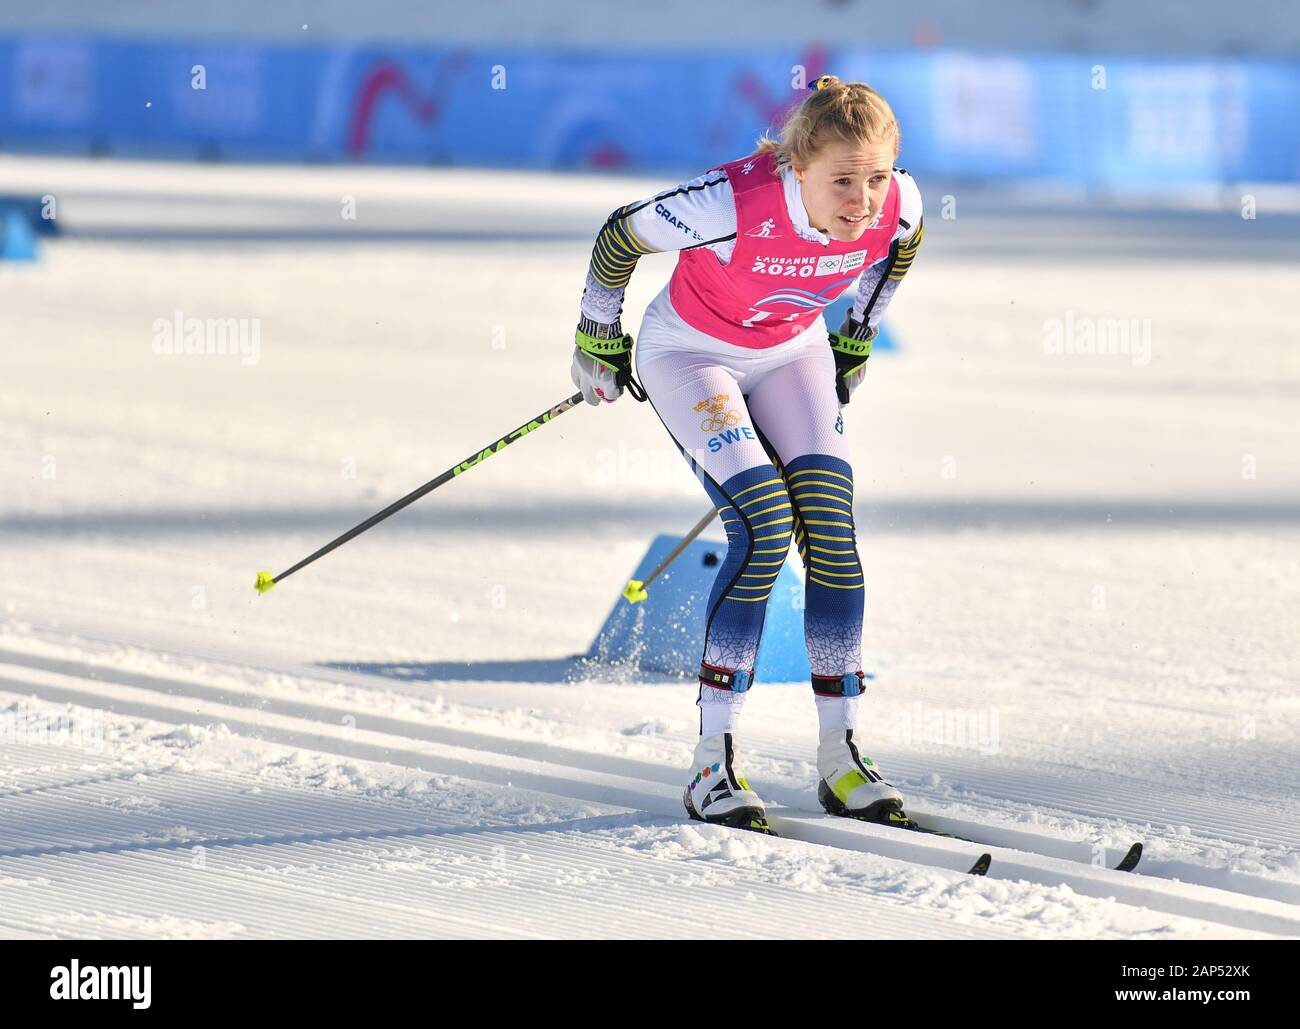 (200121) -- LE CHENIT, Jan. 21, 2020 (Xinhua) -- Maerta Rosenberg of Sweden competes during the women's 5km classic of cross-country skiing event at the 3rd Youth Winter Olympic Games, at Vallee De Joux  Cross-Country Centre, Switzerland, on Jan. 21, 2020. (Xinhua/Wu Huiwo) Stock Photo